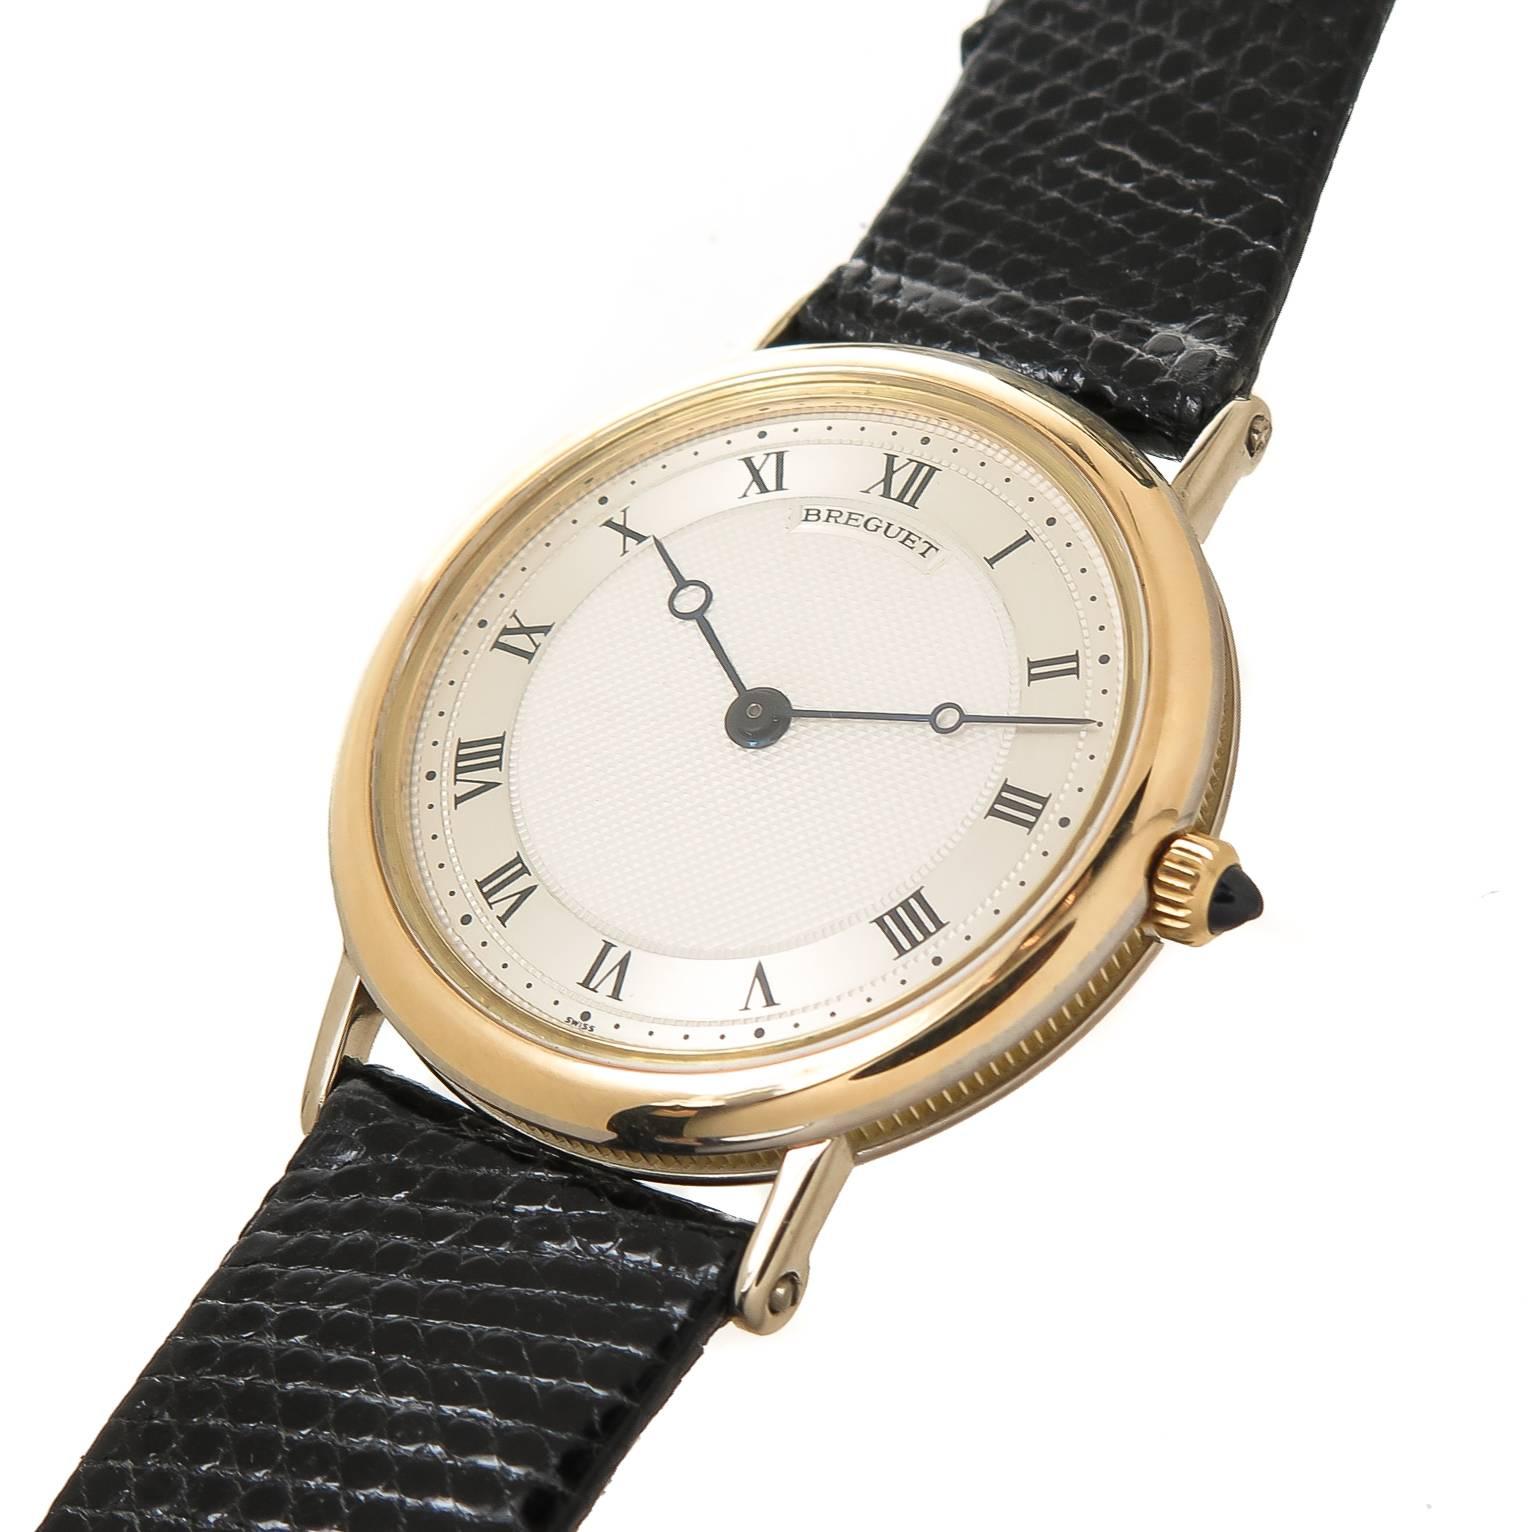 Circa 2005 Breguet Reference 3169 Wrist Watch. 33 MM White and Yellow Gold case,5 MM thick. Quartz Movement, Engine turned Silvered Dial with Black Roman Numerals, classic Breguet Hands and a Sapphire Crown. New Black Lizard Strap, total watch